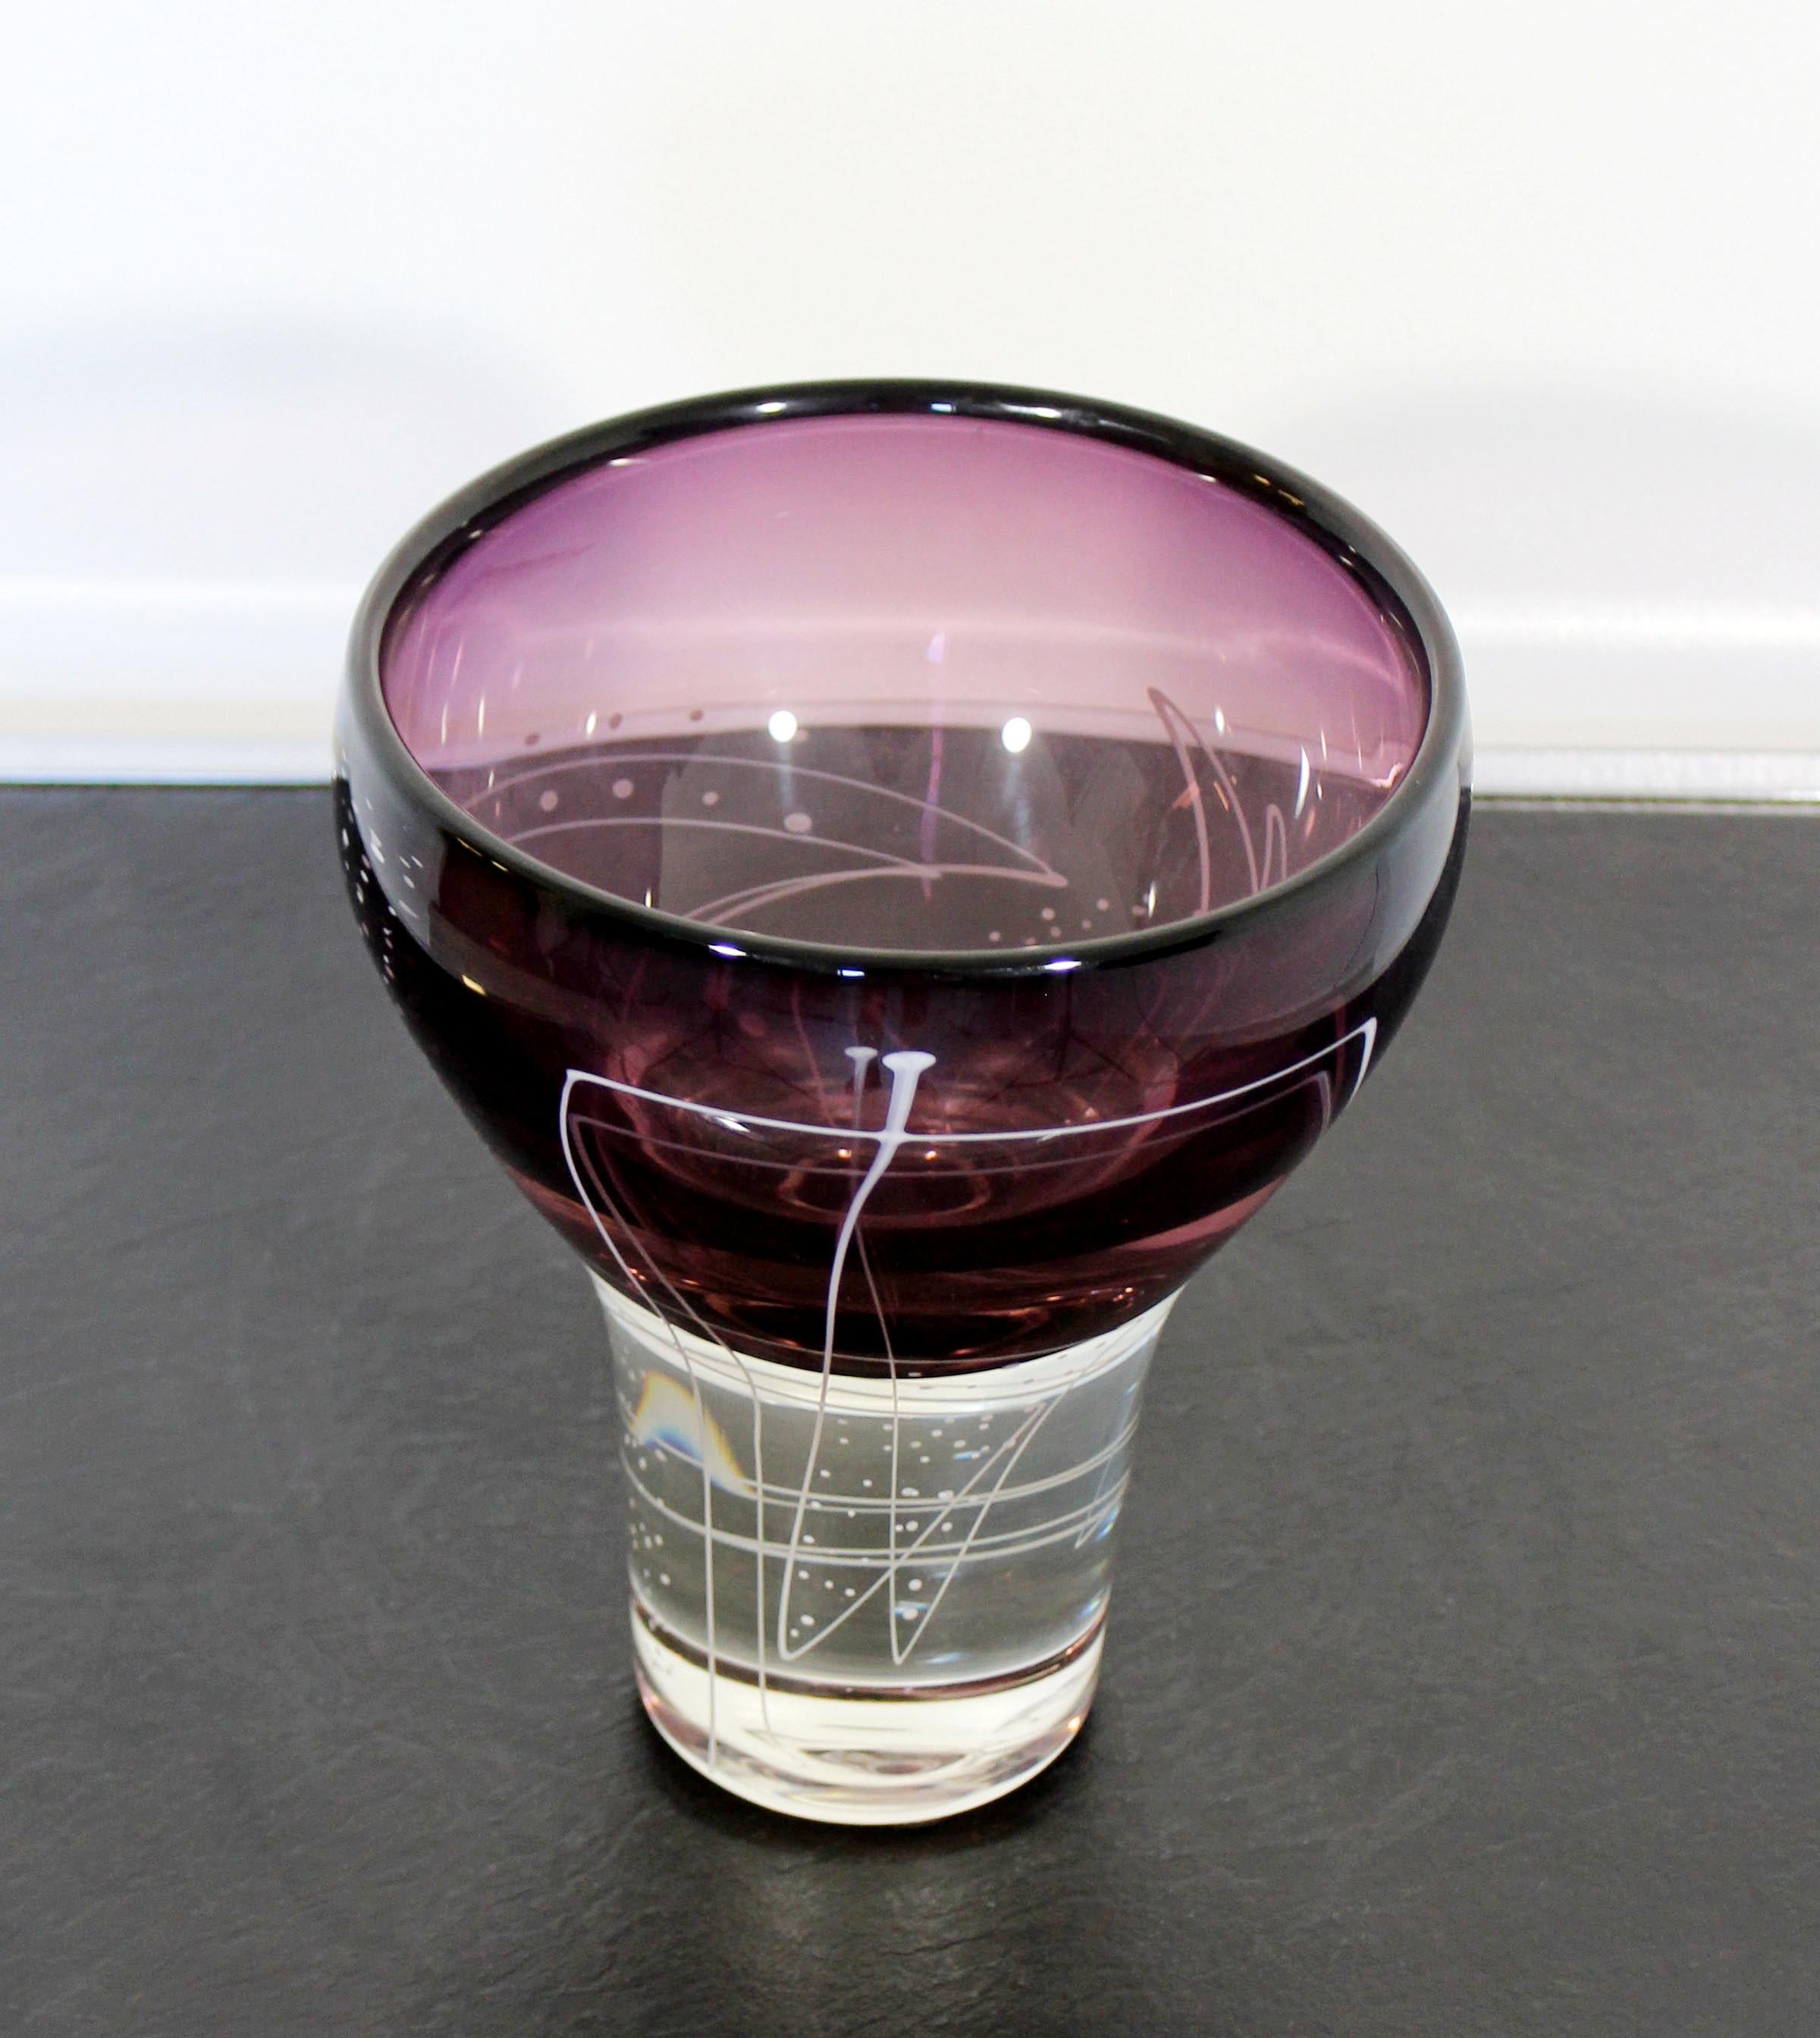 For your consideration is a lovely glass art vase, signed by Mark J. Sudduth, from the Amethyst Line Series. In excellent condition. The dimensions are 7